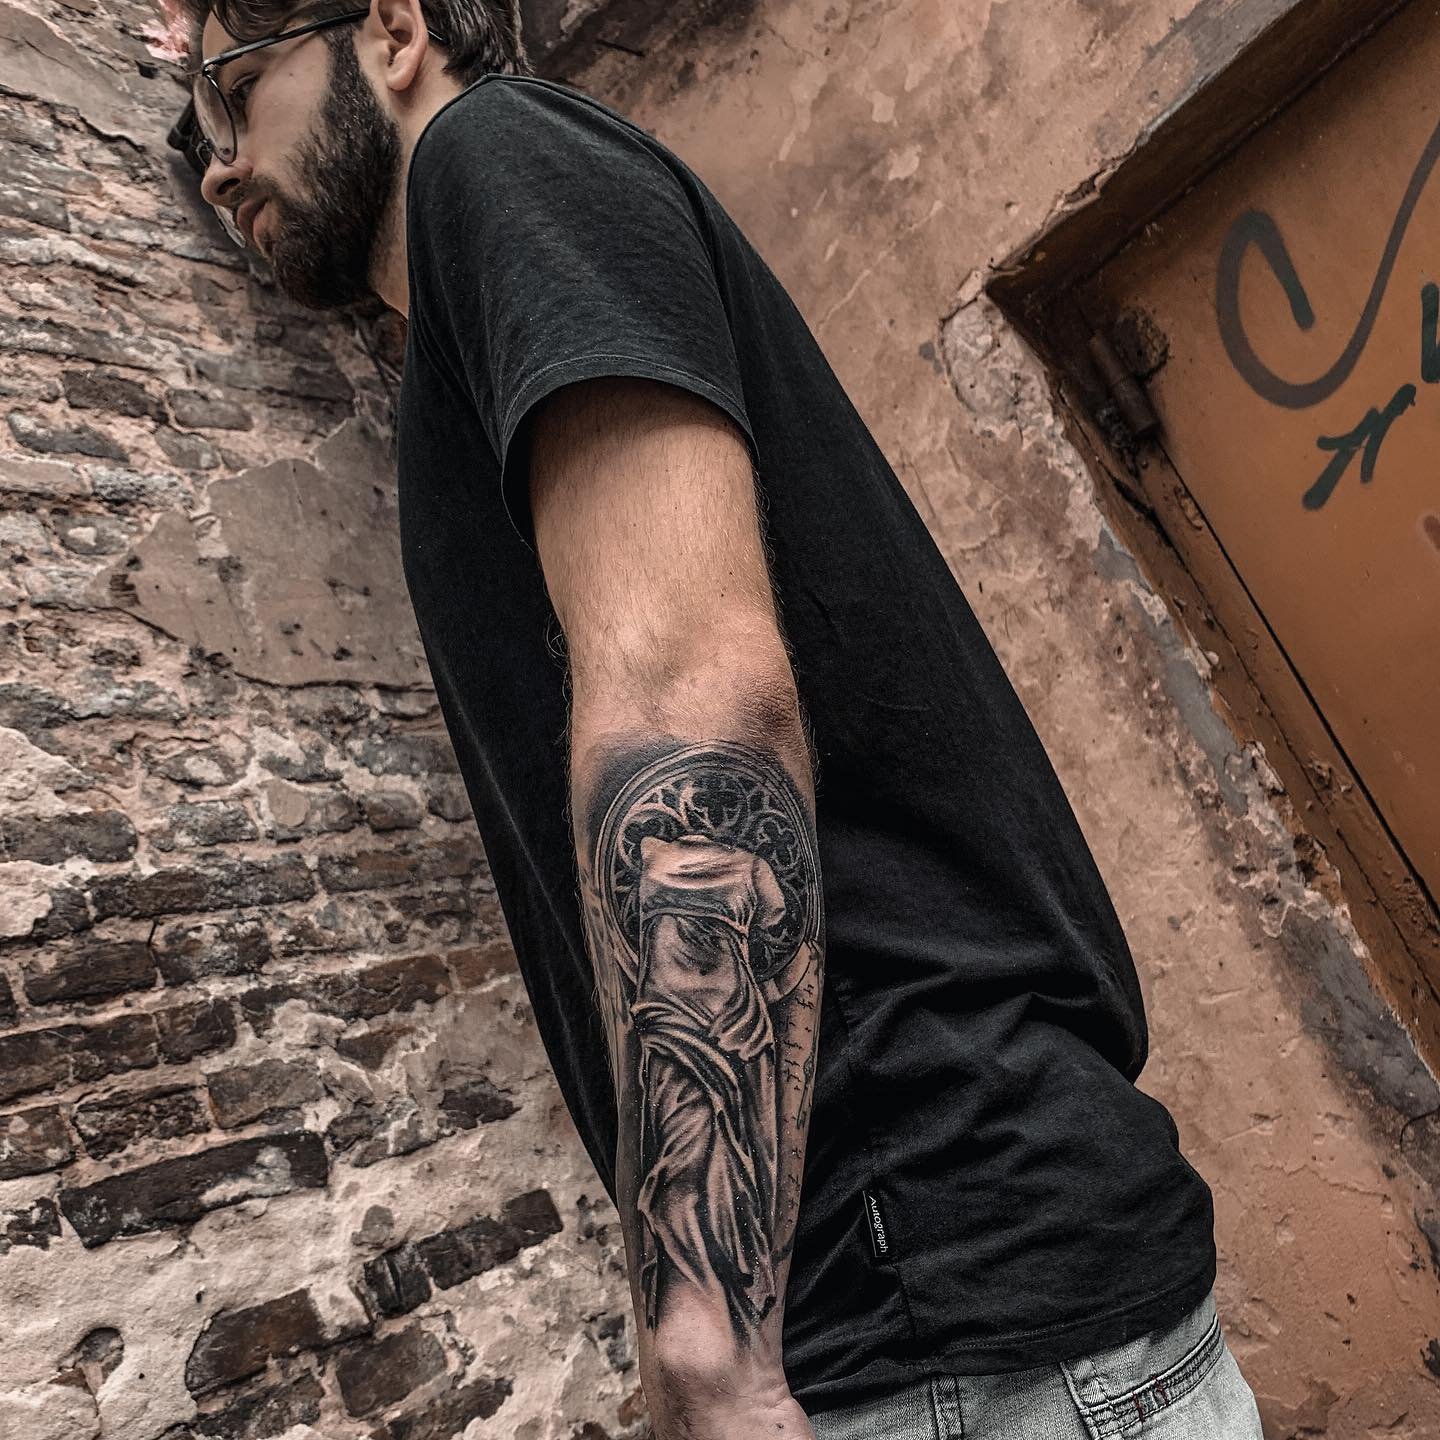 Arm Tattoos Photos, Download The BEST Free Arm Tattoos Stock Photos & HD  Images